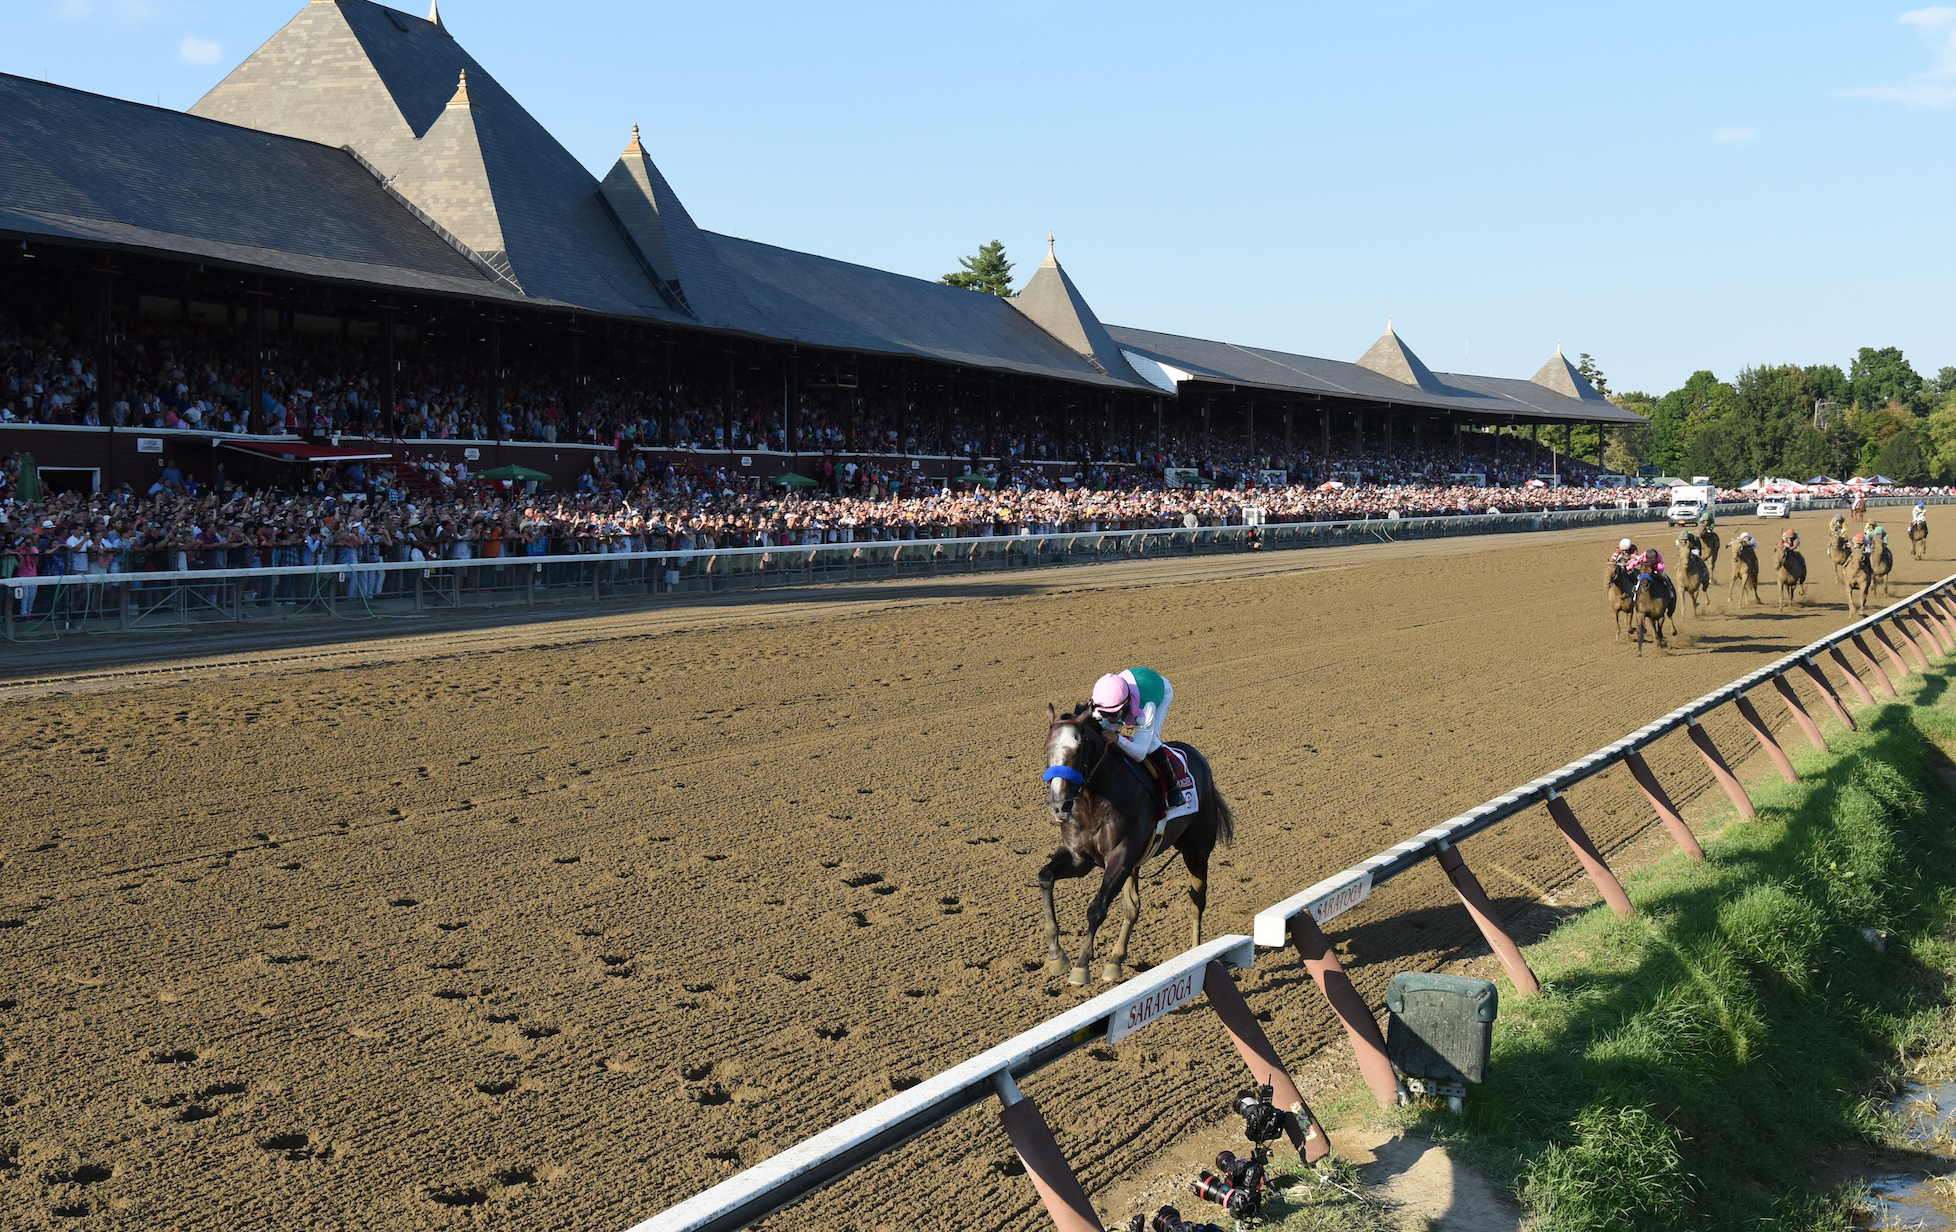 Different class: Arrogate announced himself as a potential champion with this stunning 13½-length victory in the Travers Stakes at Saratoga in August 2016. Photo: Jamie Coulter